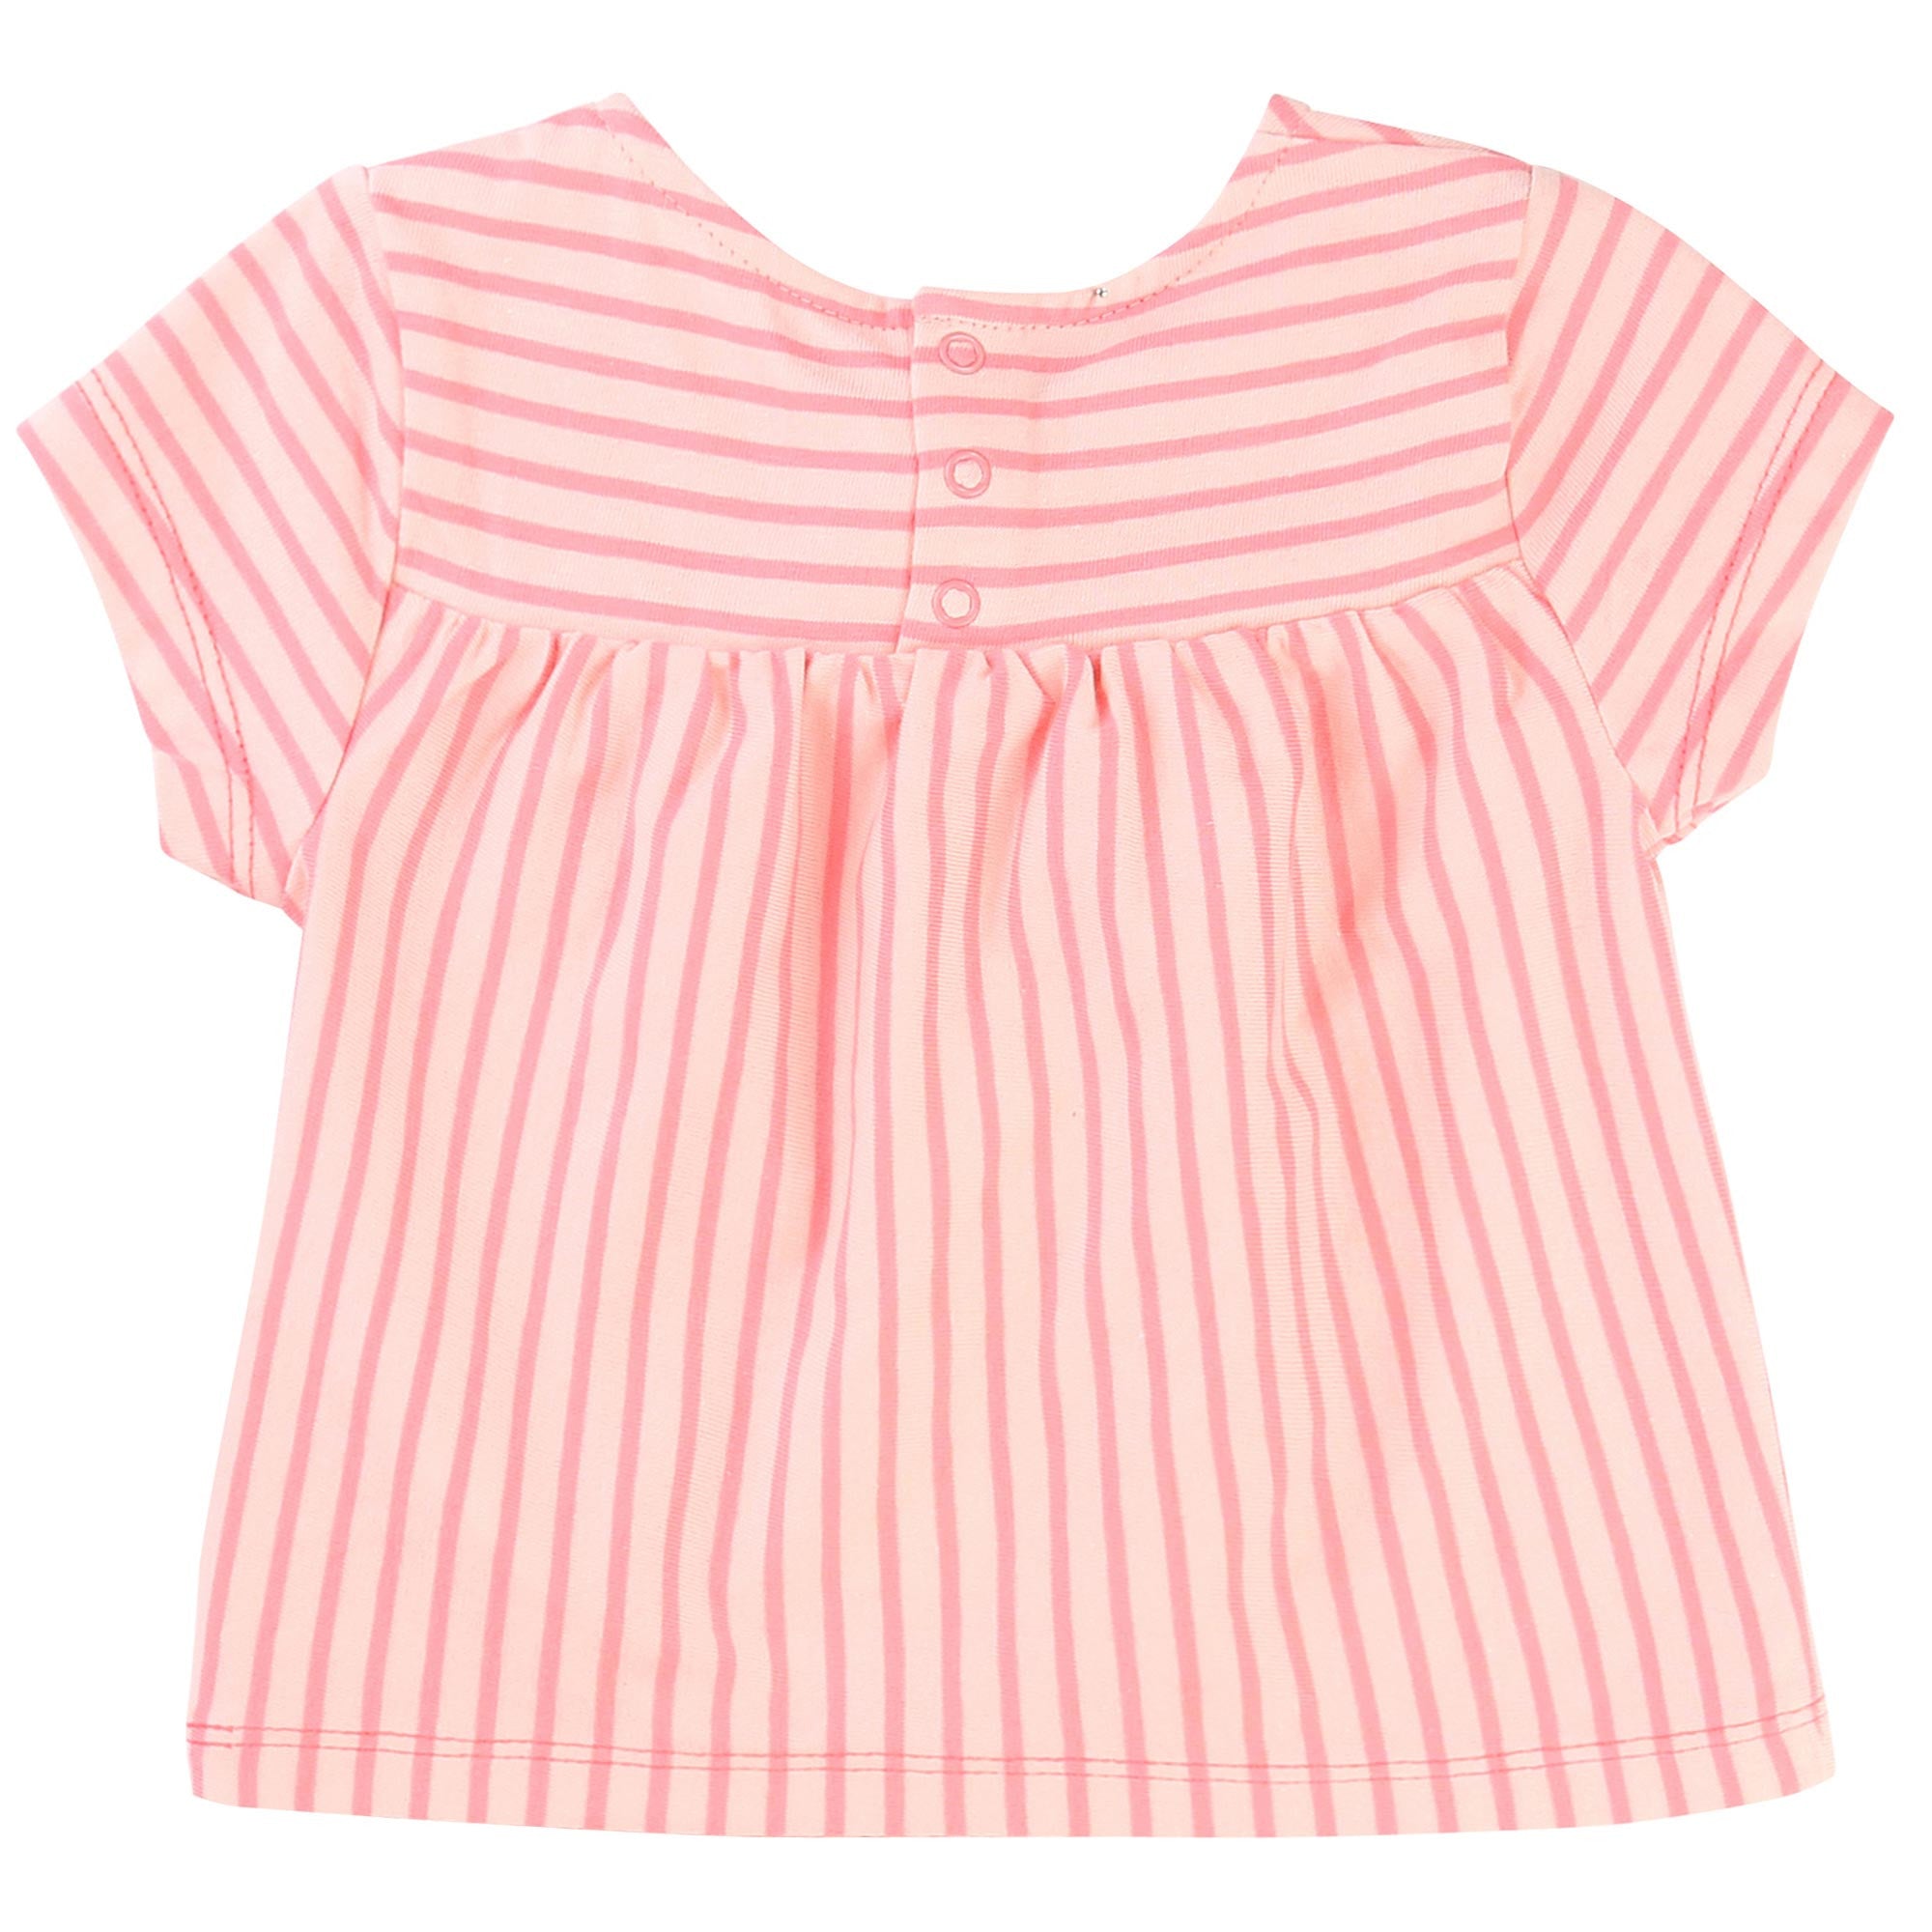 Baby Girls Pink Striped Cotton Blouse